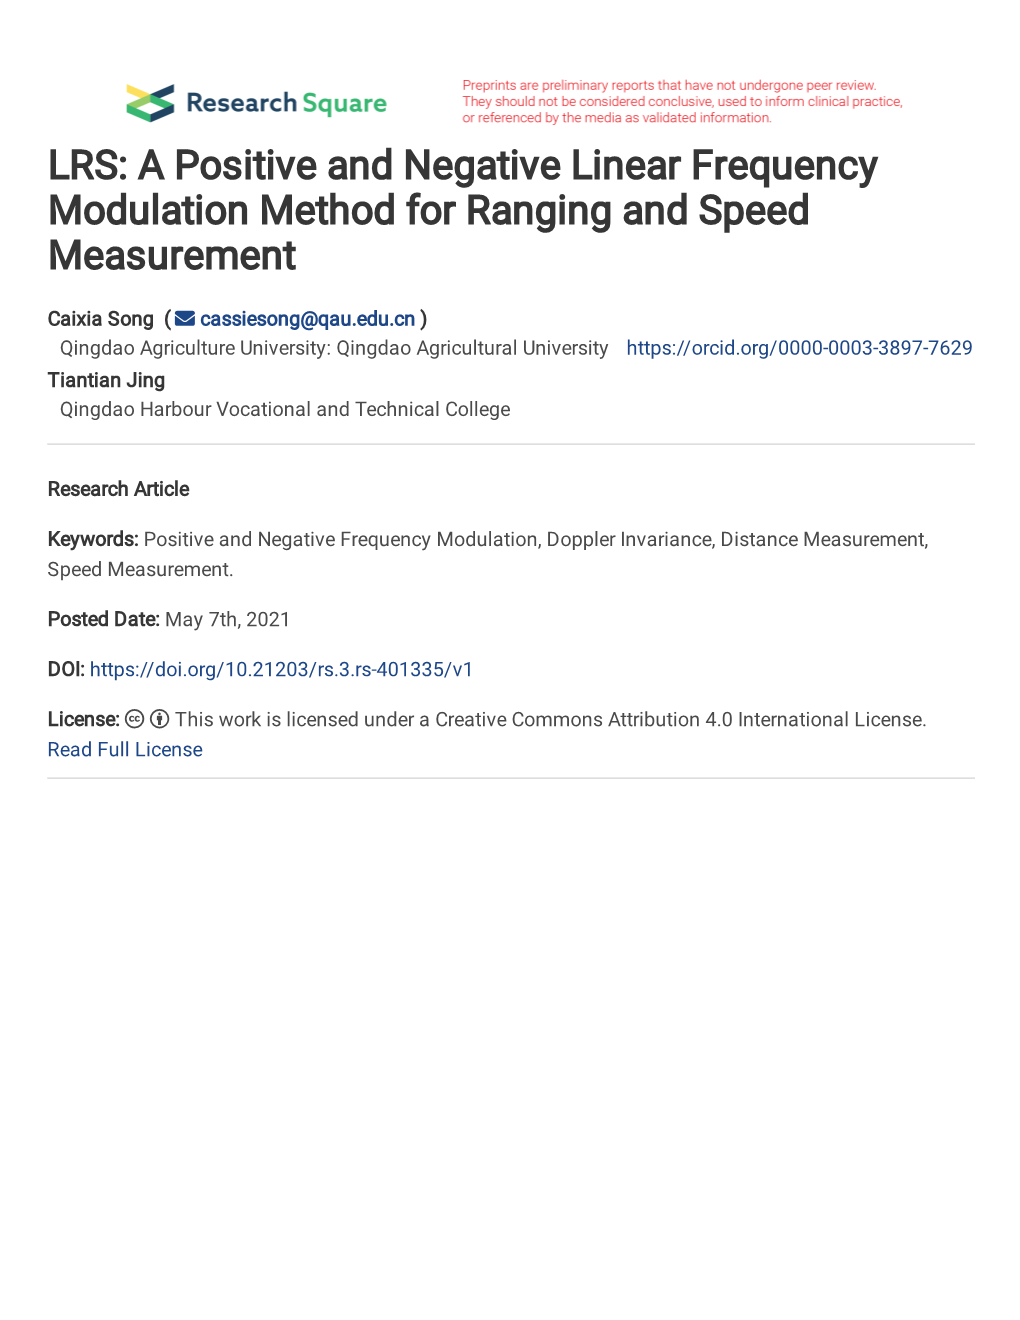 LRS: a Positive and Negative Linear Frequency Modulation Method for Ranging and Speed Measurement